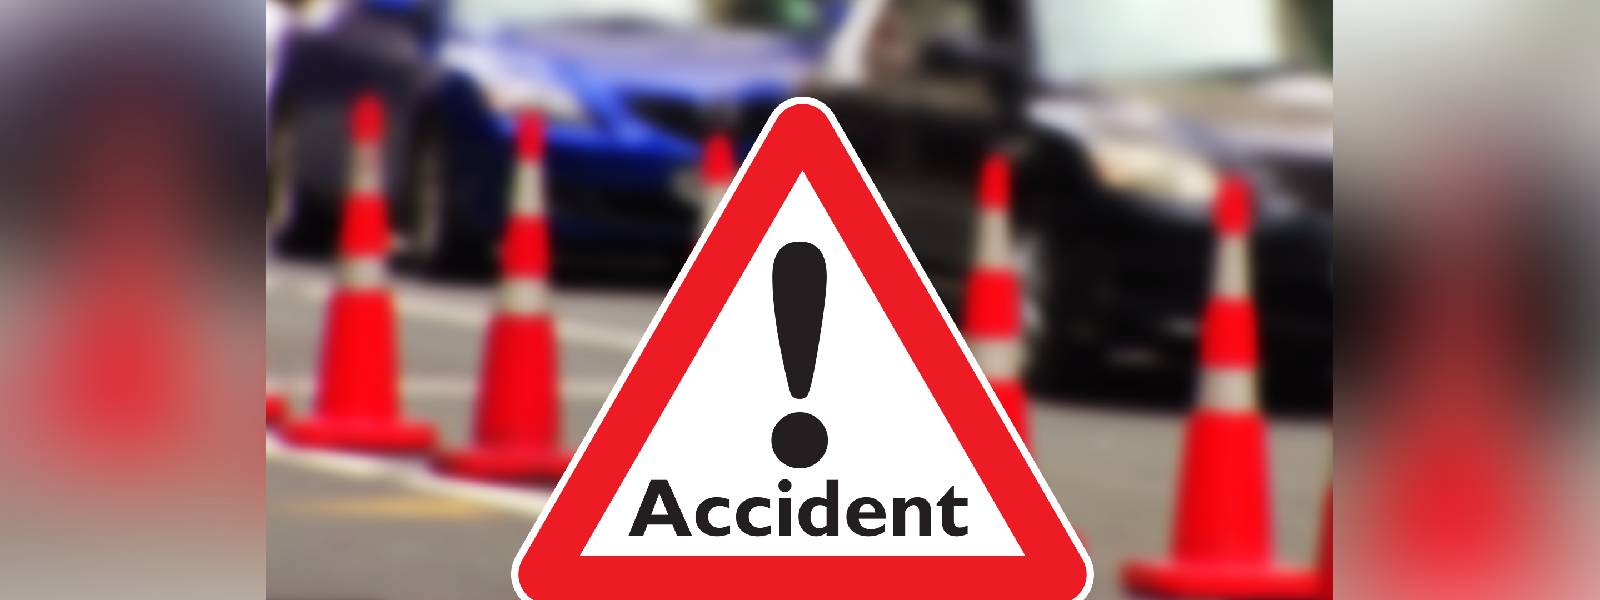 Expert Committee appointed to mitigate road accidents